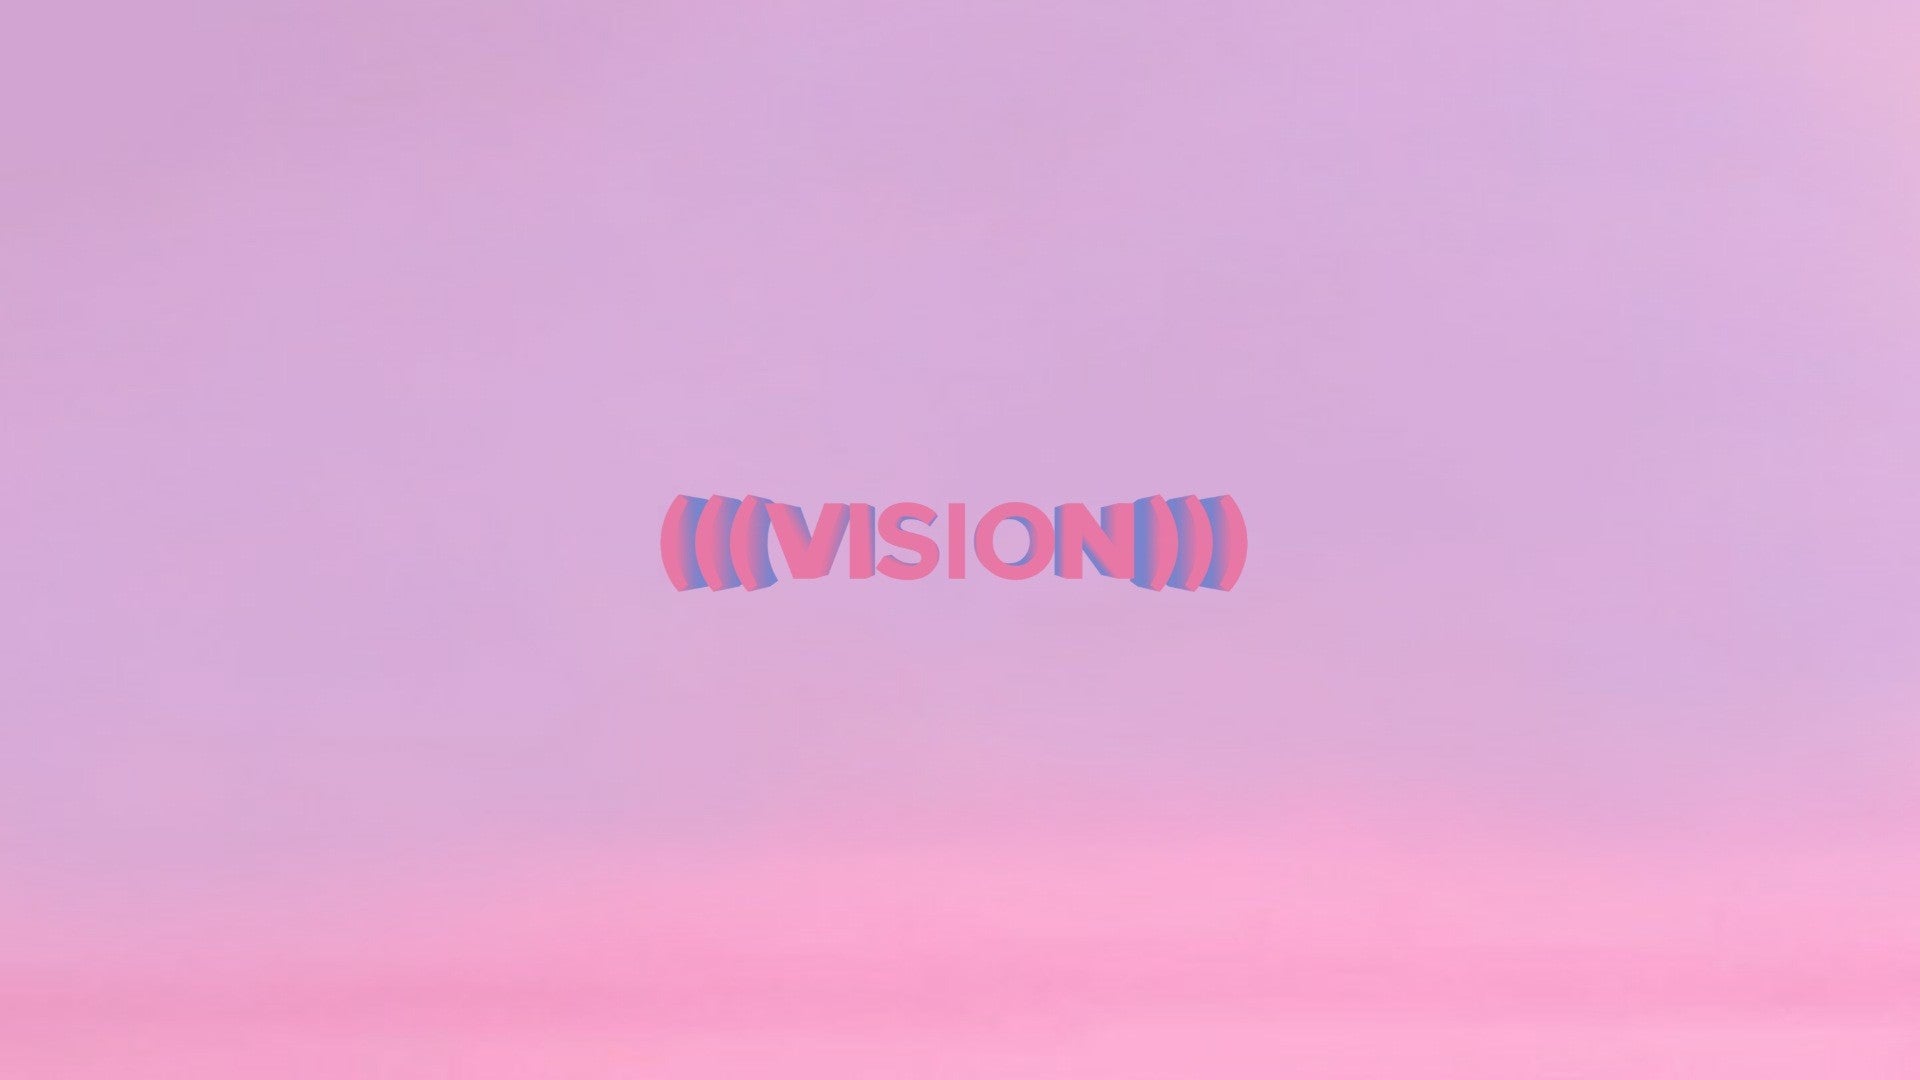 Made a vision wallpaper for desktop, with the pink sky from the new balances ad. Hope yall like it